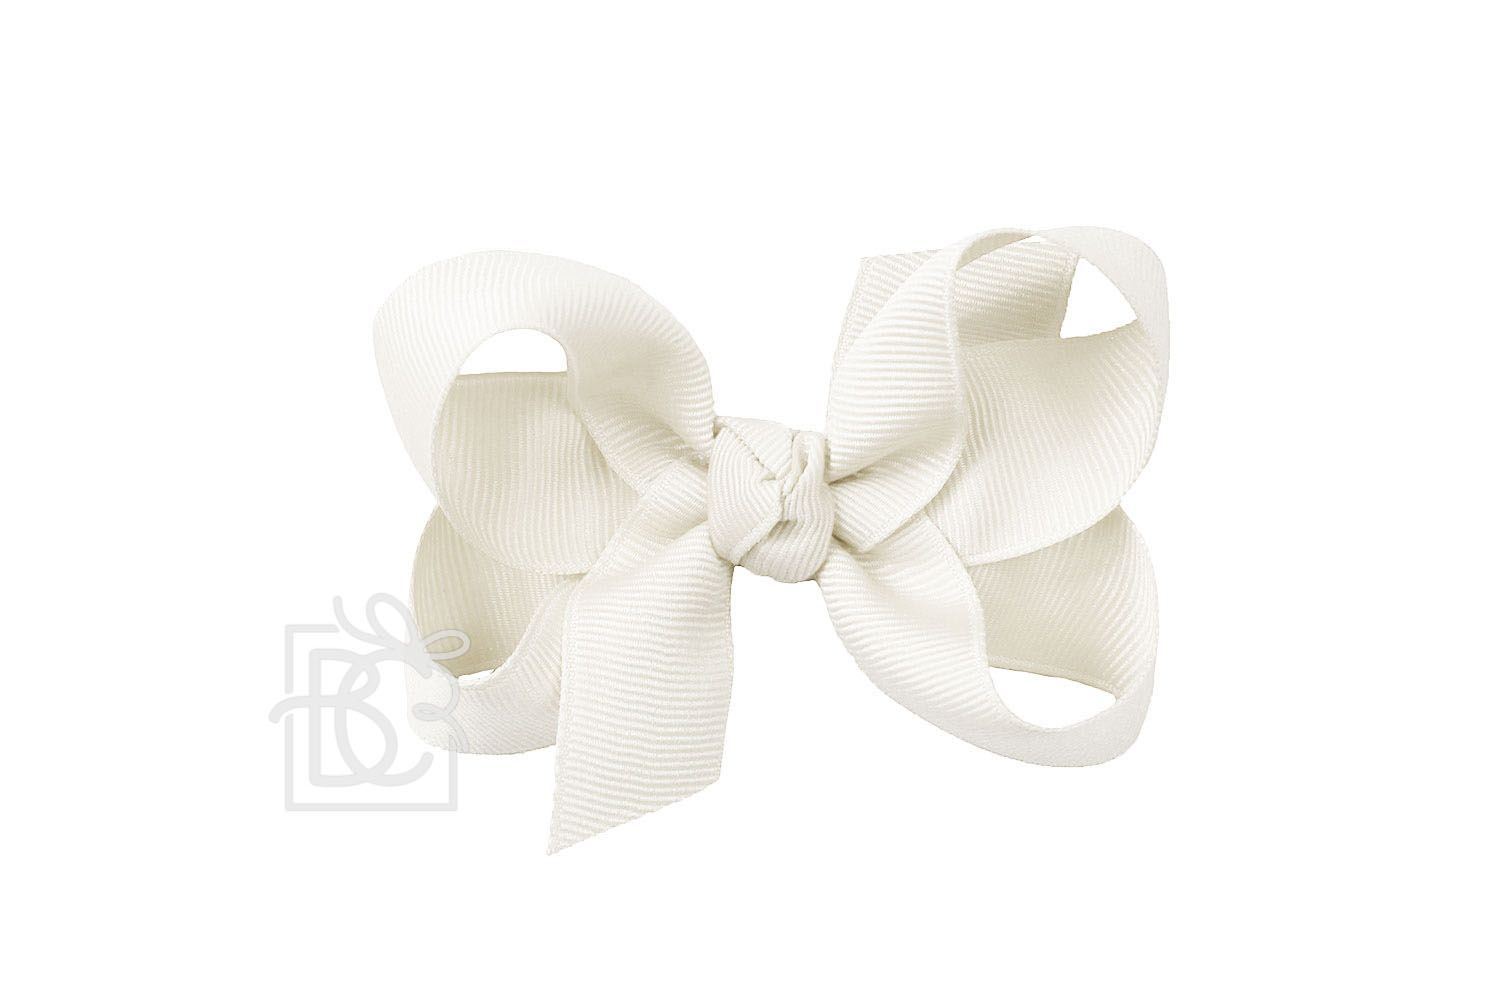 Beyond Creations - Hair Bows and Accessories - Small 3